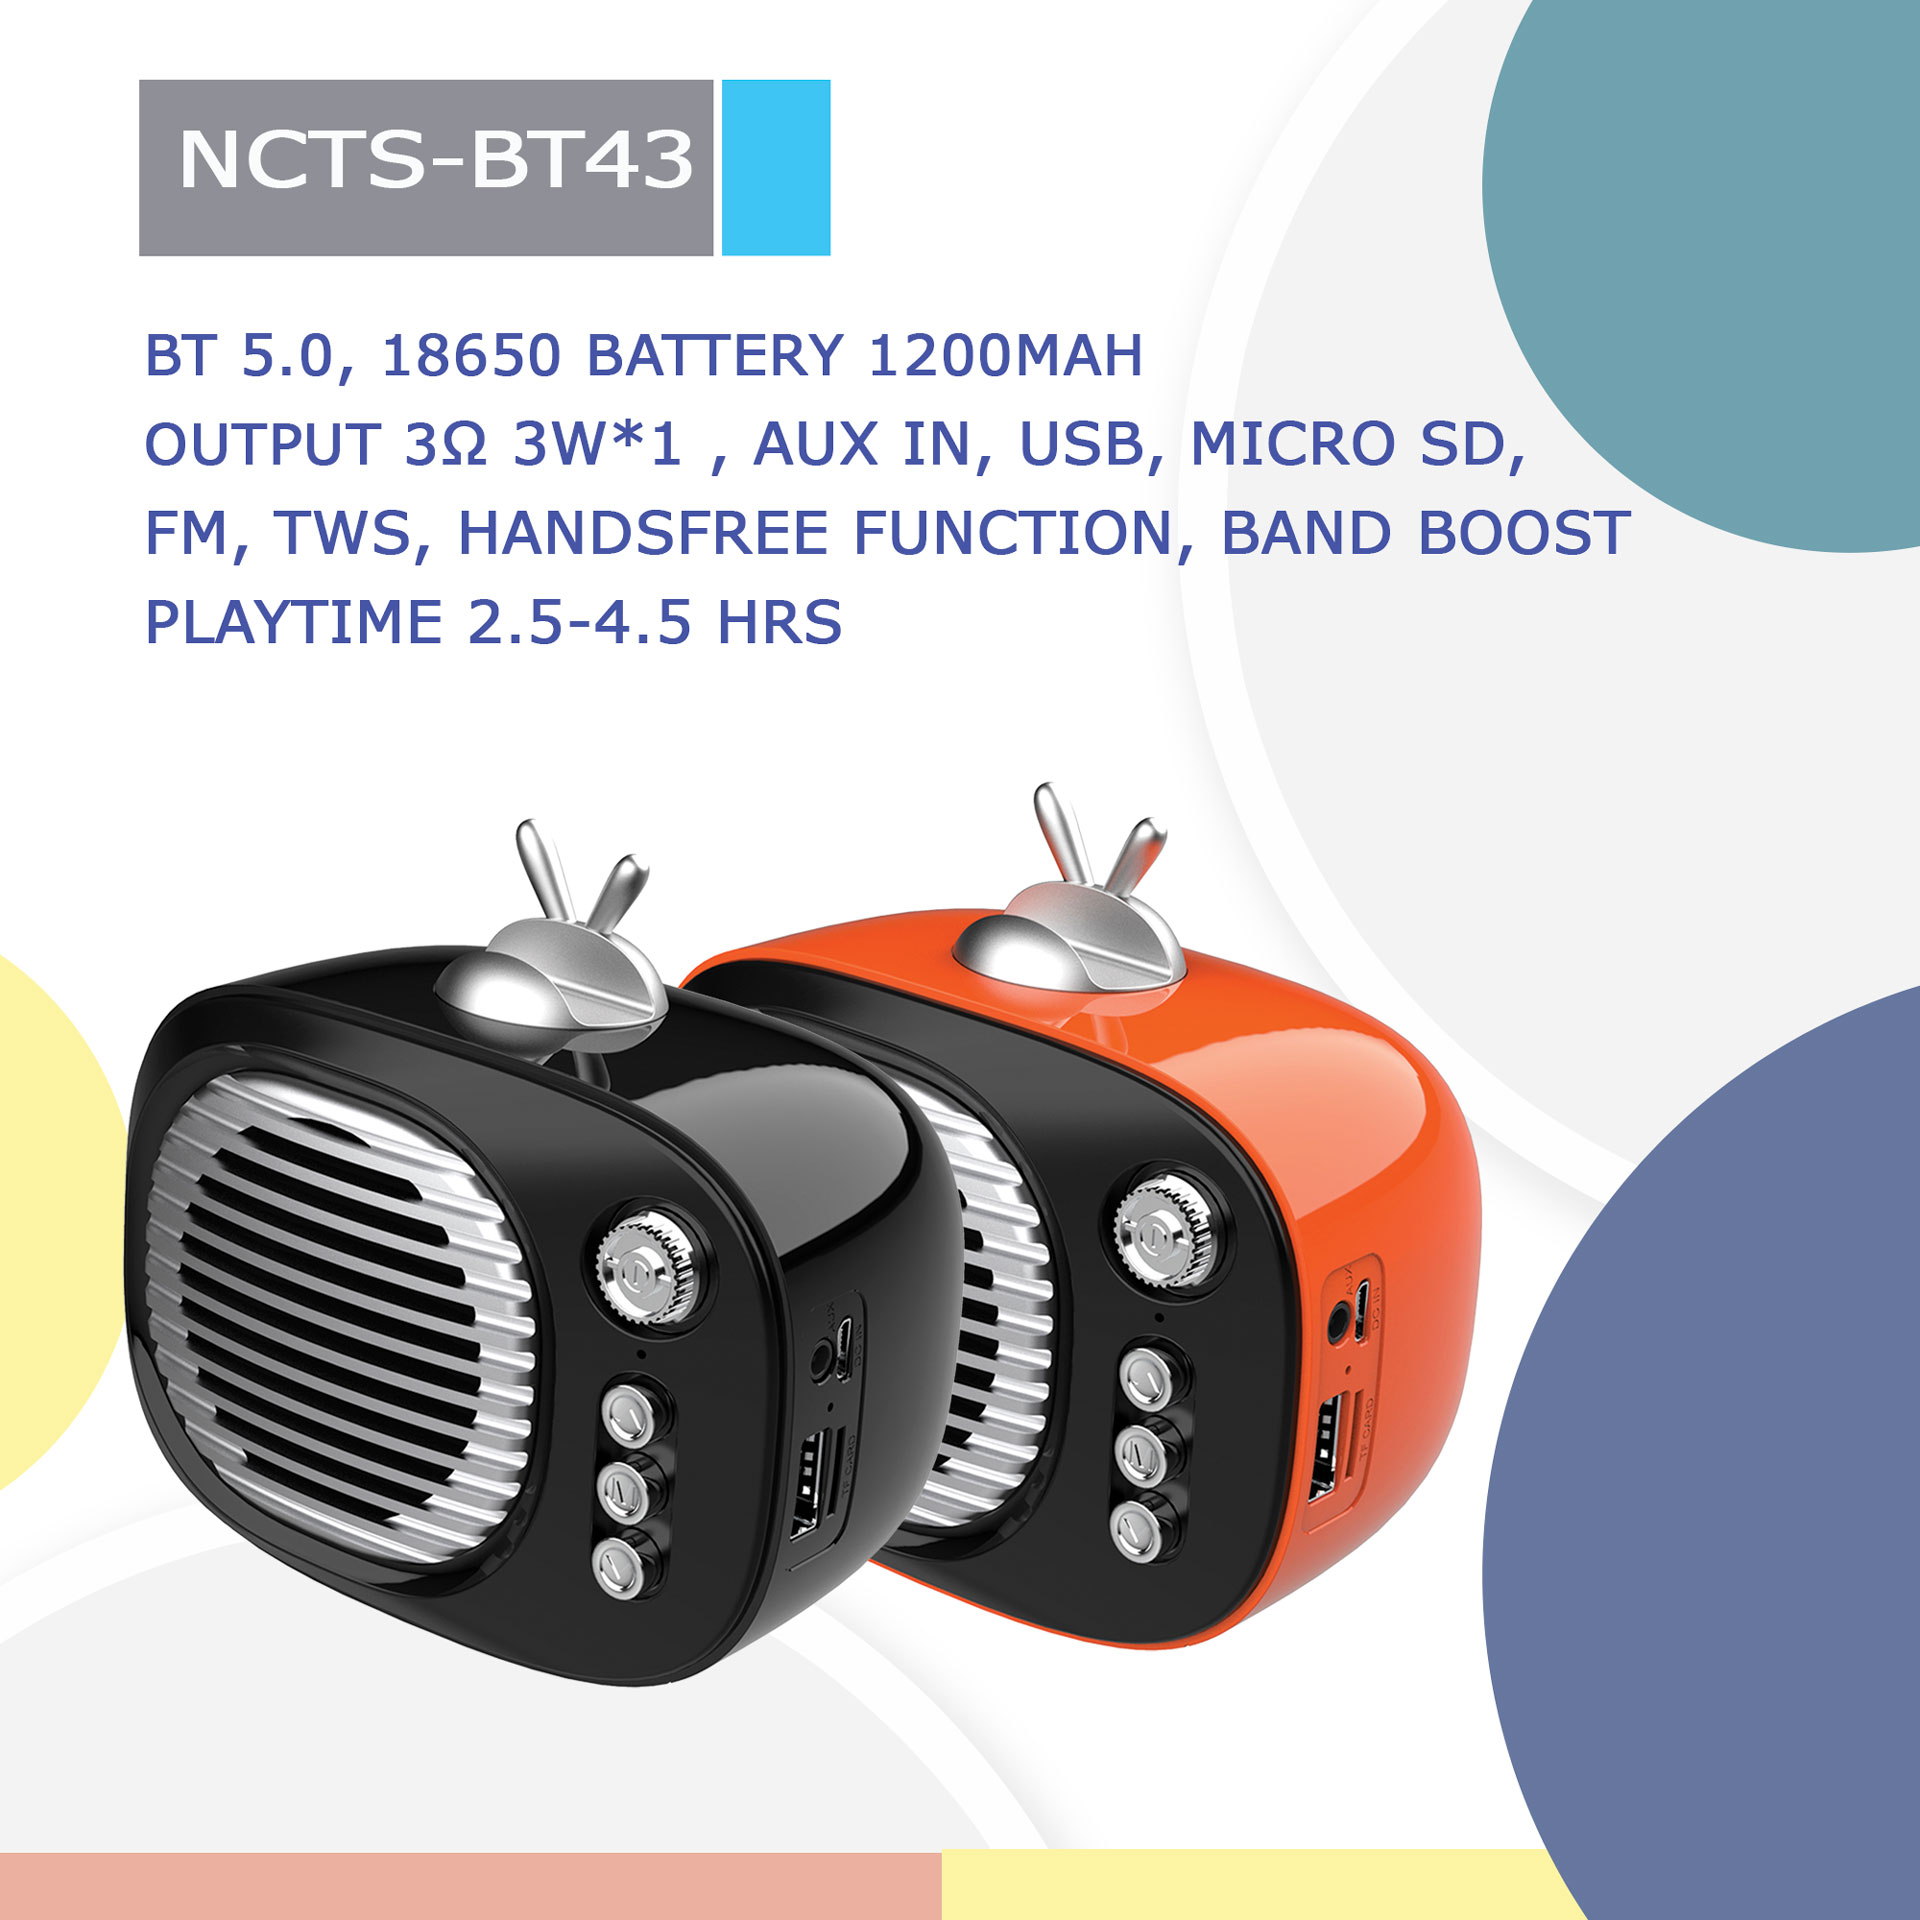 NCTS-BT43